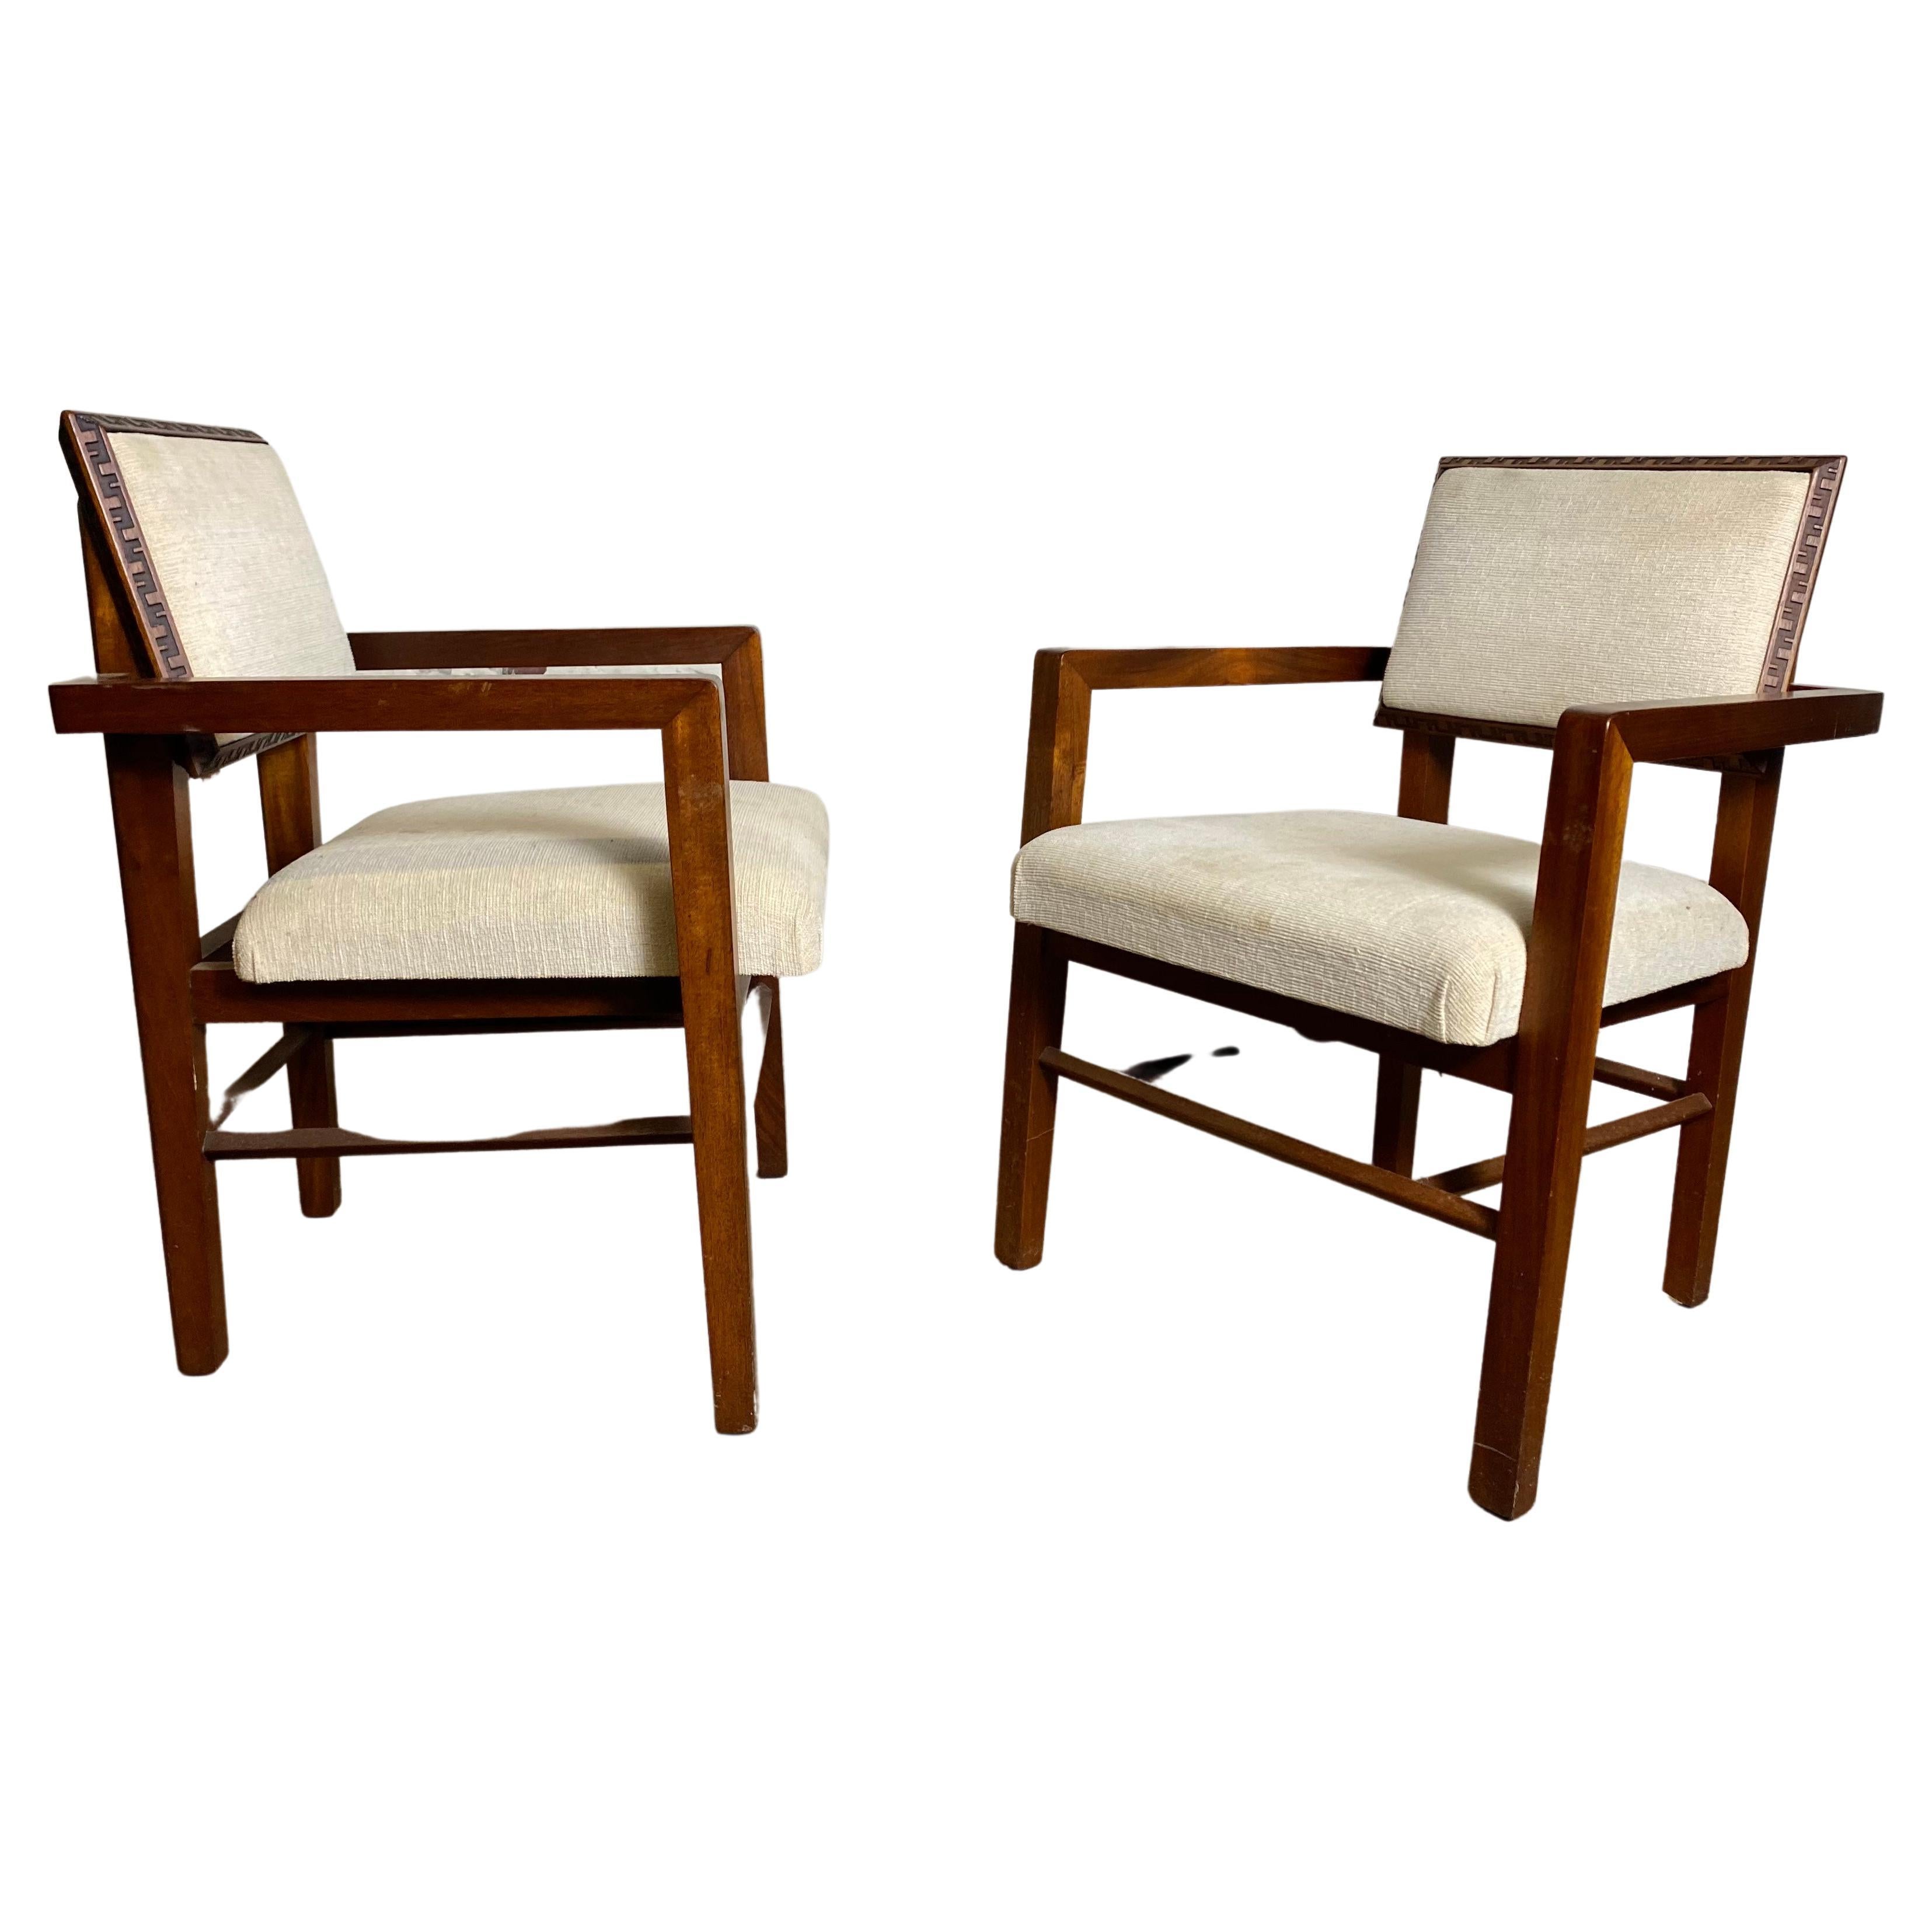 Set '6' Taliesin Dining Chairs by Frank Lloyd Wright for Heritage-Henredon